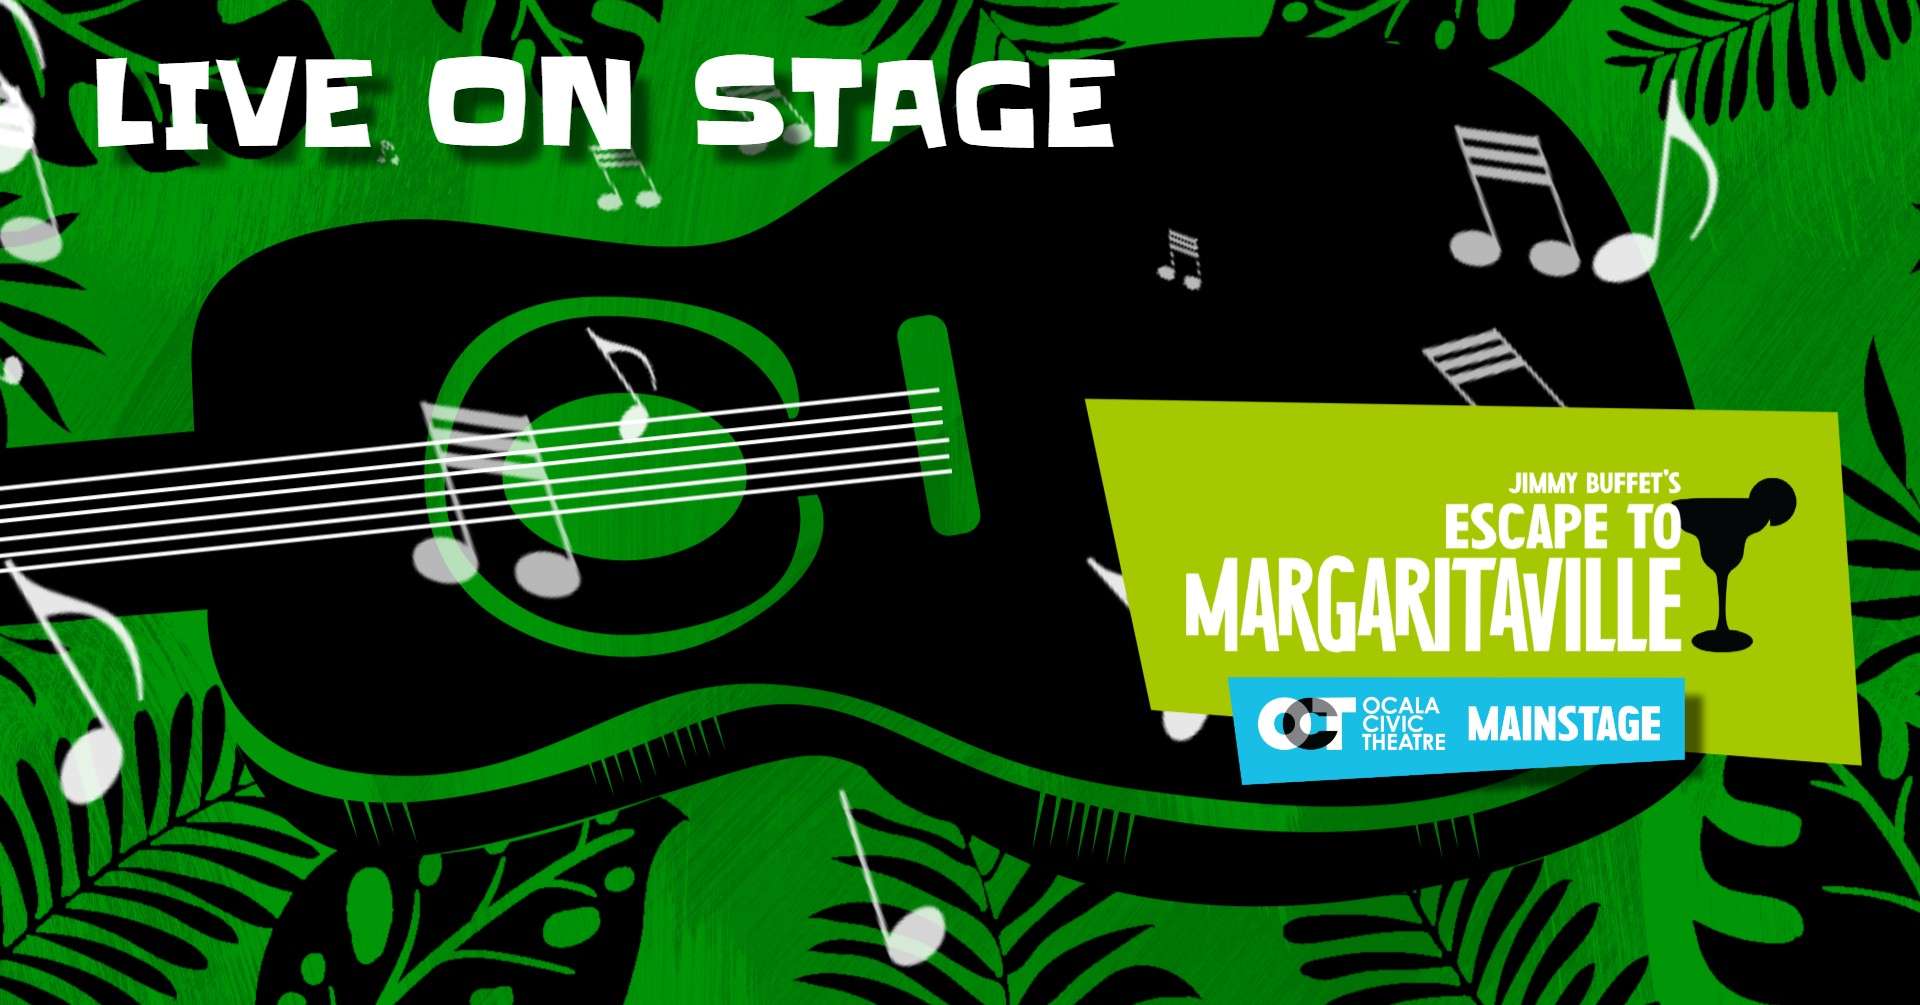 live on stage- escape to margaritaville